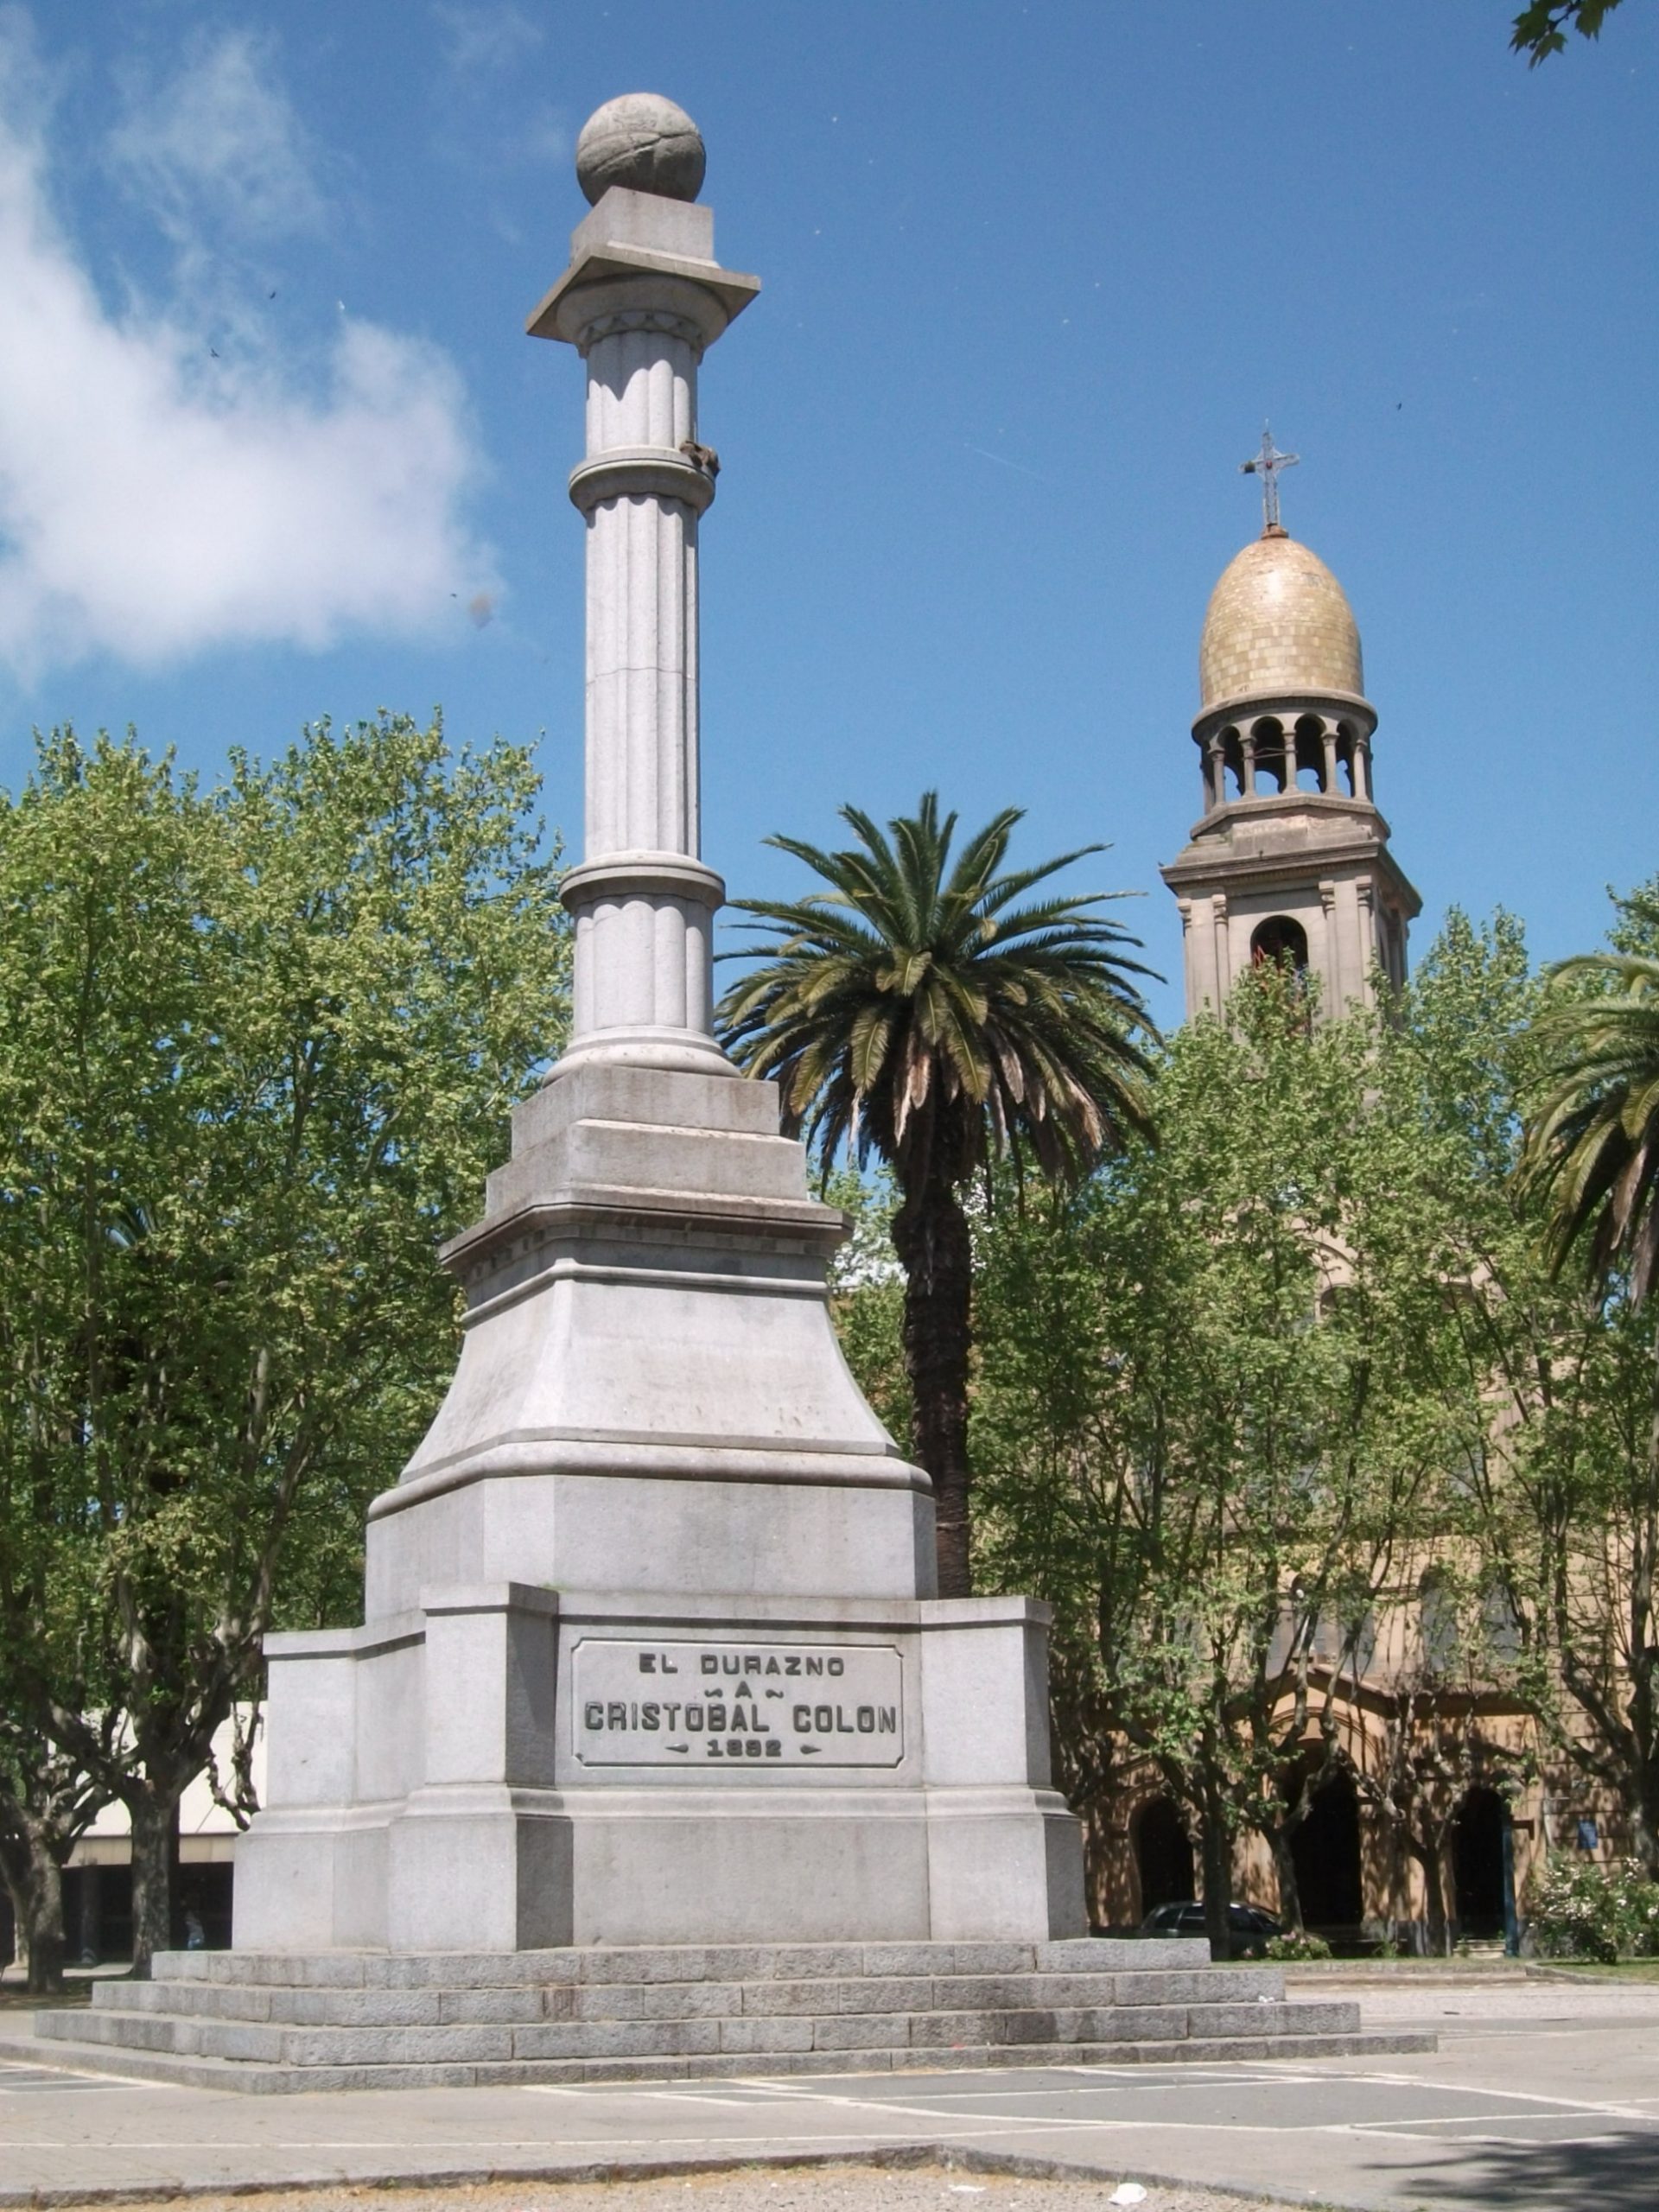 Public monument in a park with palm trees, consisting of a stone column with a globe at its top. On the base an inscription reads "EL DURAZO / A / CRISTOBAL COLON"